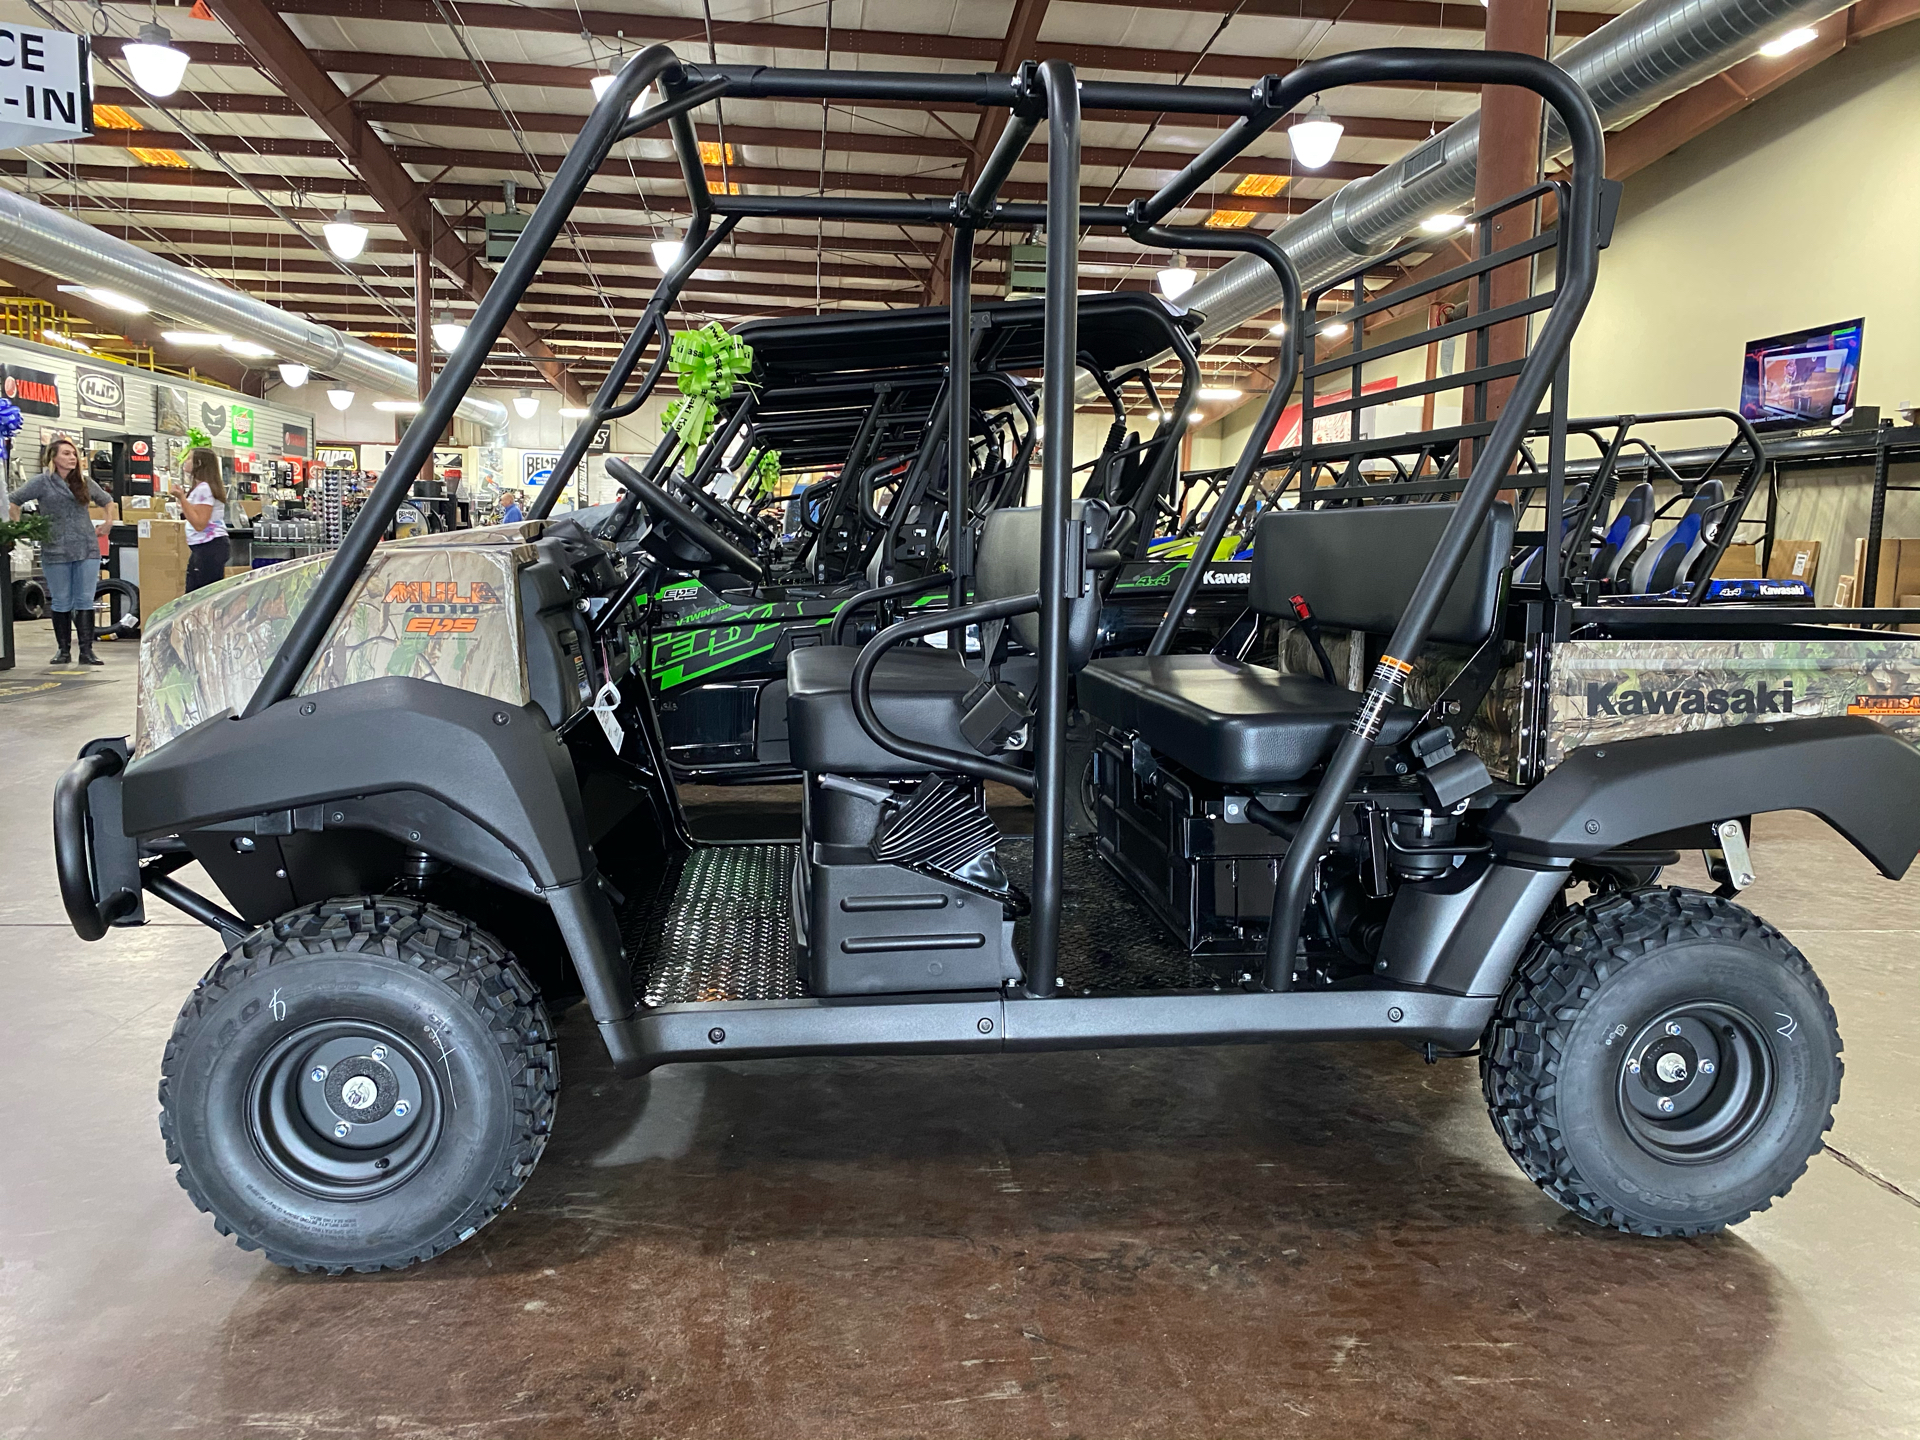 New 2021 Kawasaki Mule 4010 Trans4x4 Camo Utility Vehicles in NC | Stock Number: - greatwesternmotorcycles.com